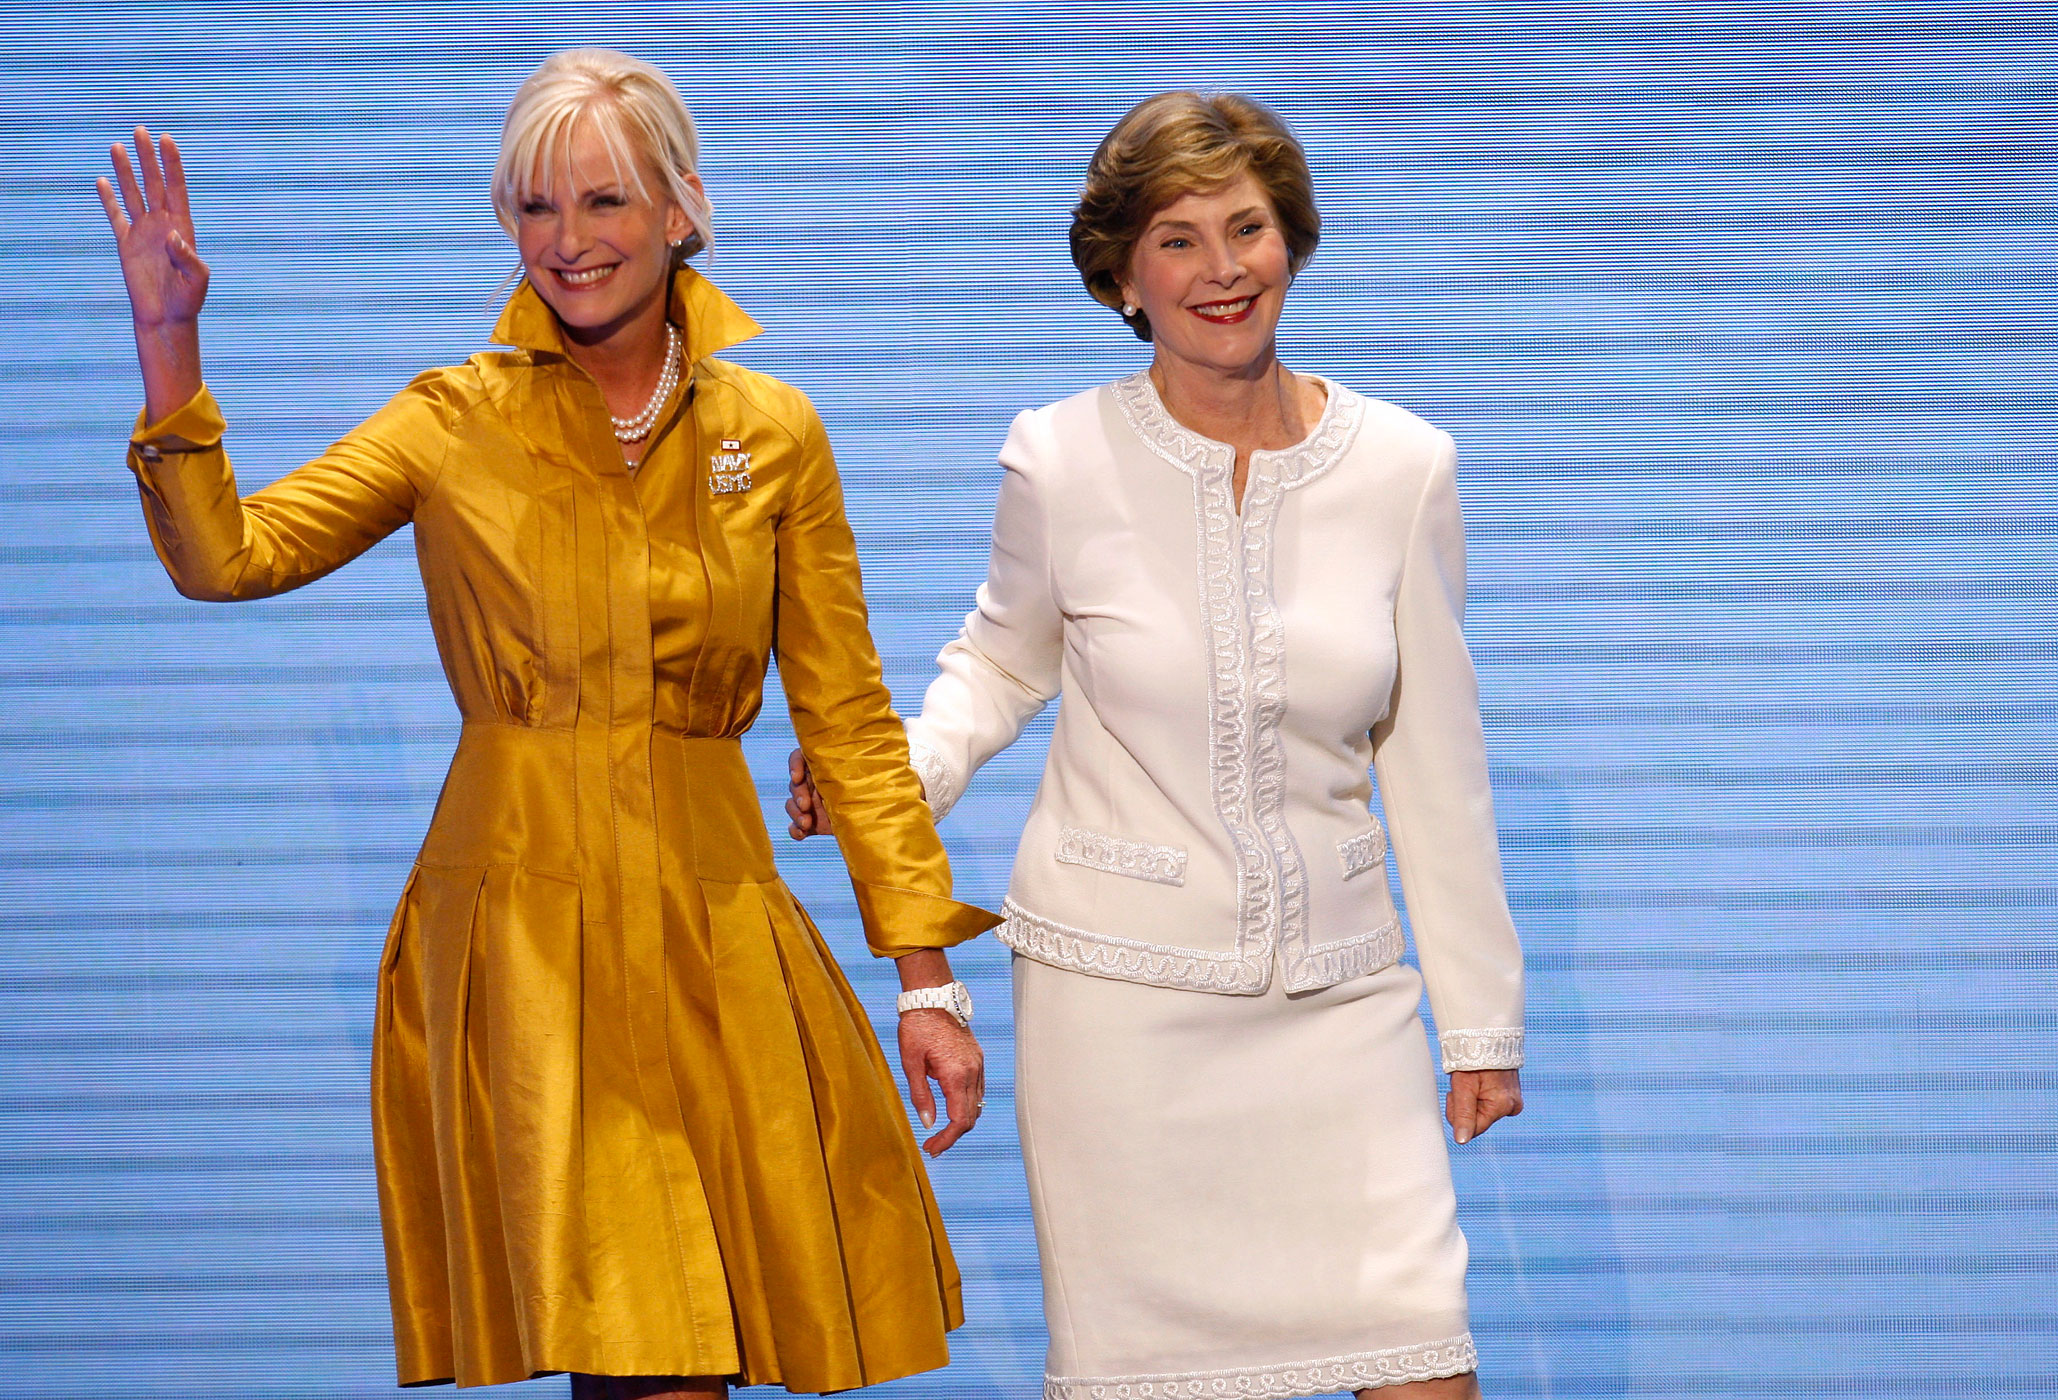 Cindy McCain and first lady Laura Bush appear together at the 2008 Republican National Convention in St. Paul